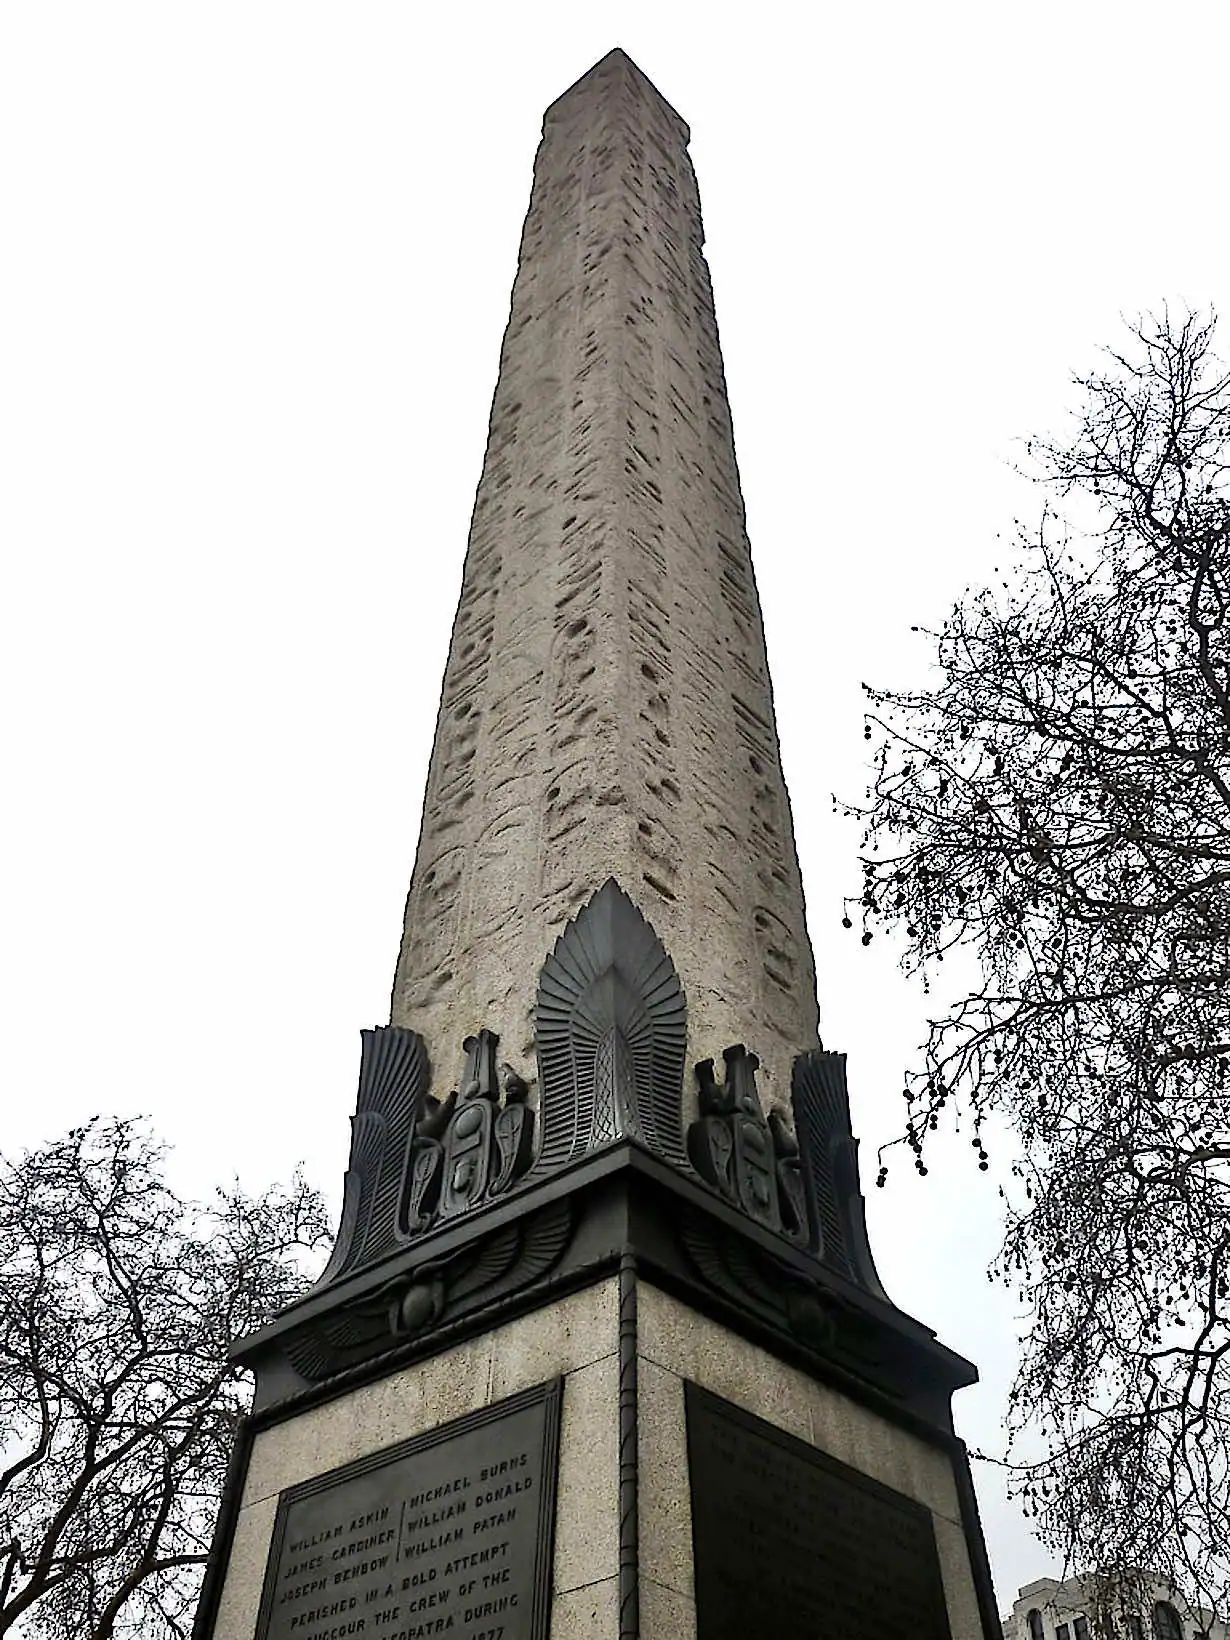 Close up of the Egyptian obelisk on Victoria Embankment